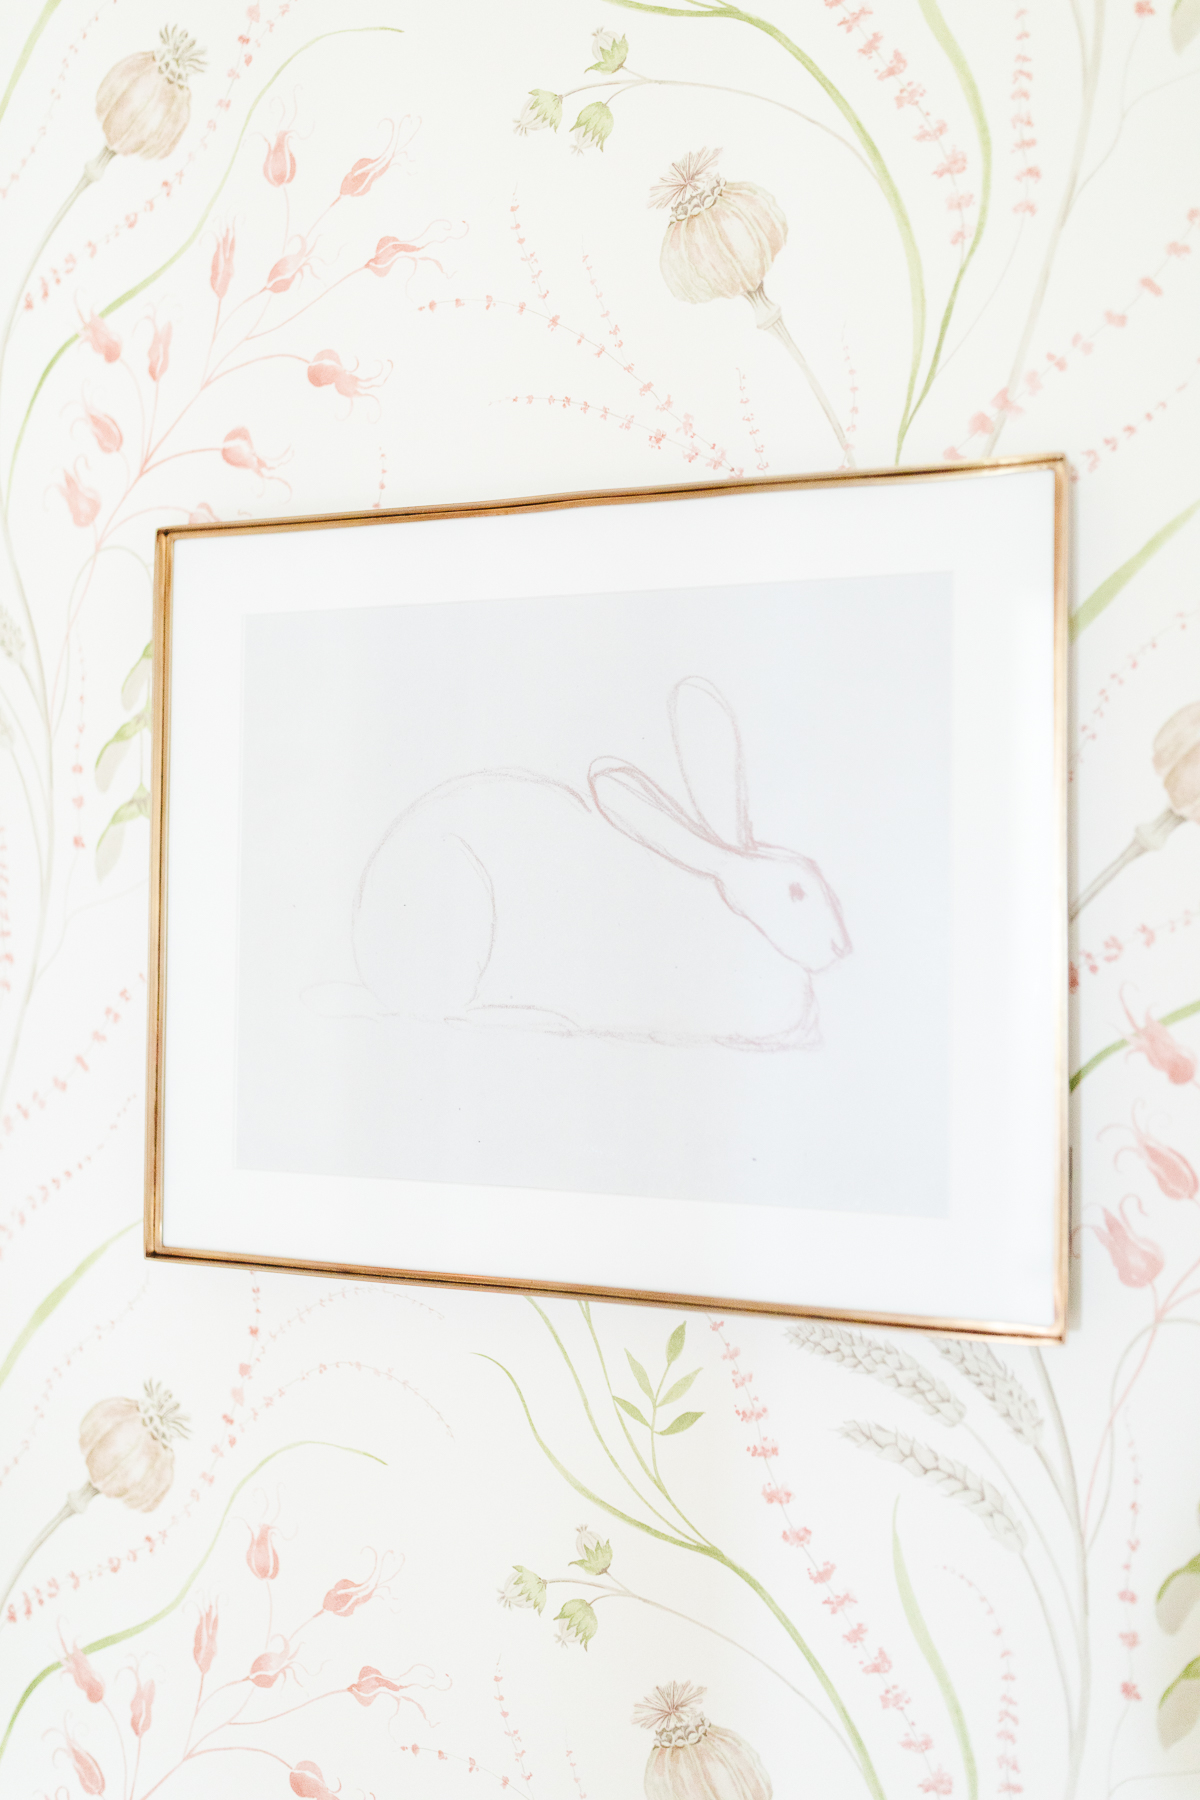 Bunny sketch art on a wallpapered wall.